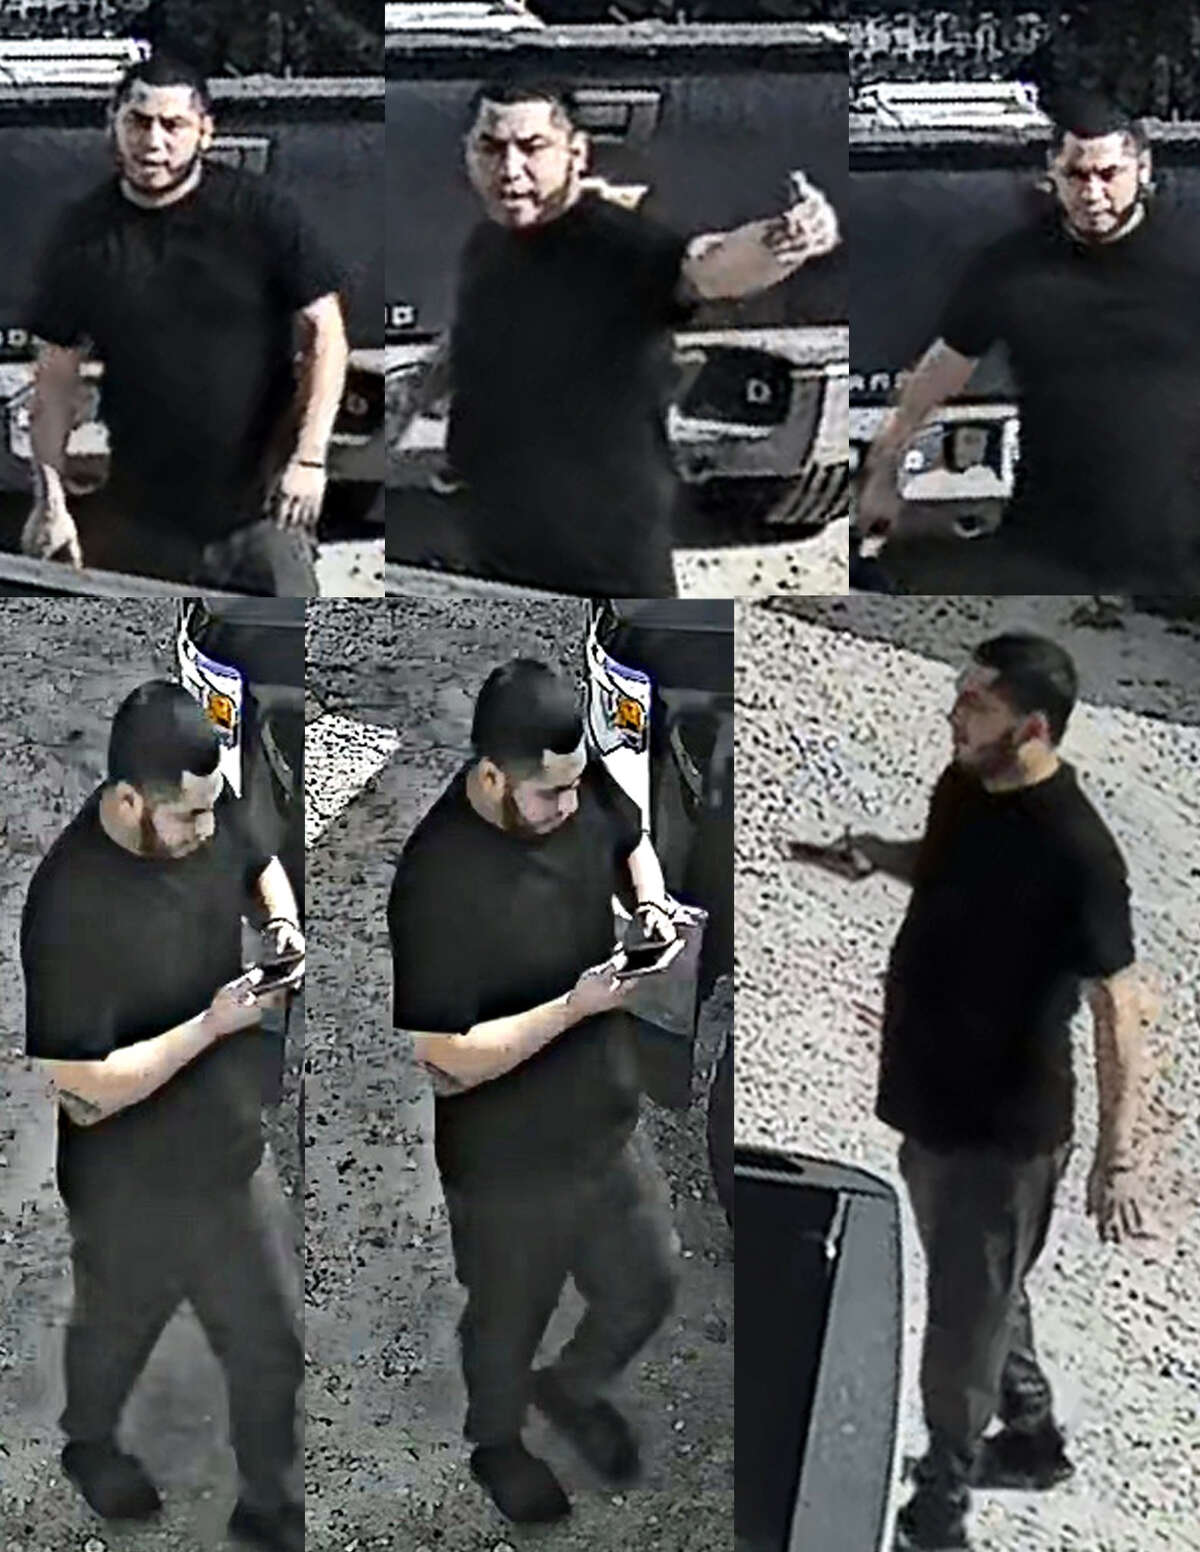 Houston Police are looking for this man, a person of interest, in the shooting death of Sergeant Sean Rios, 47, a 25-year veteran of the department. Rios was killed November 9, 2020. Handout photo from the Houston Police Department